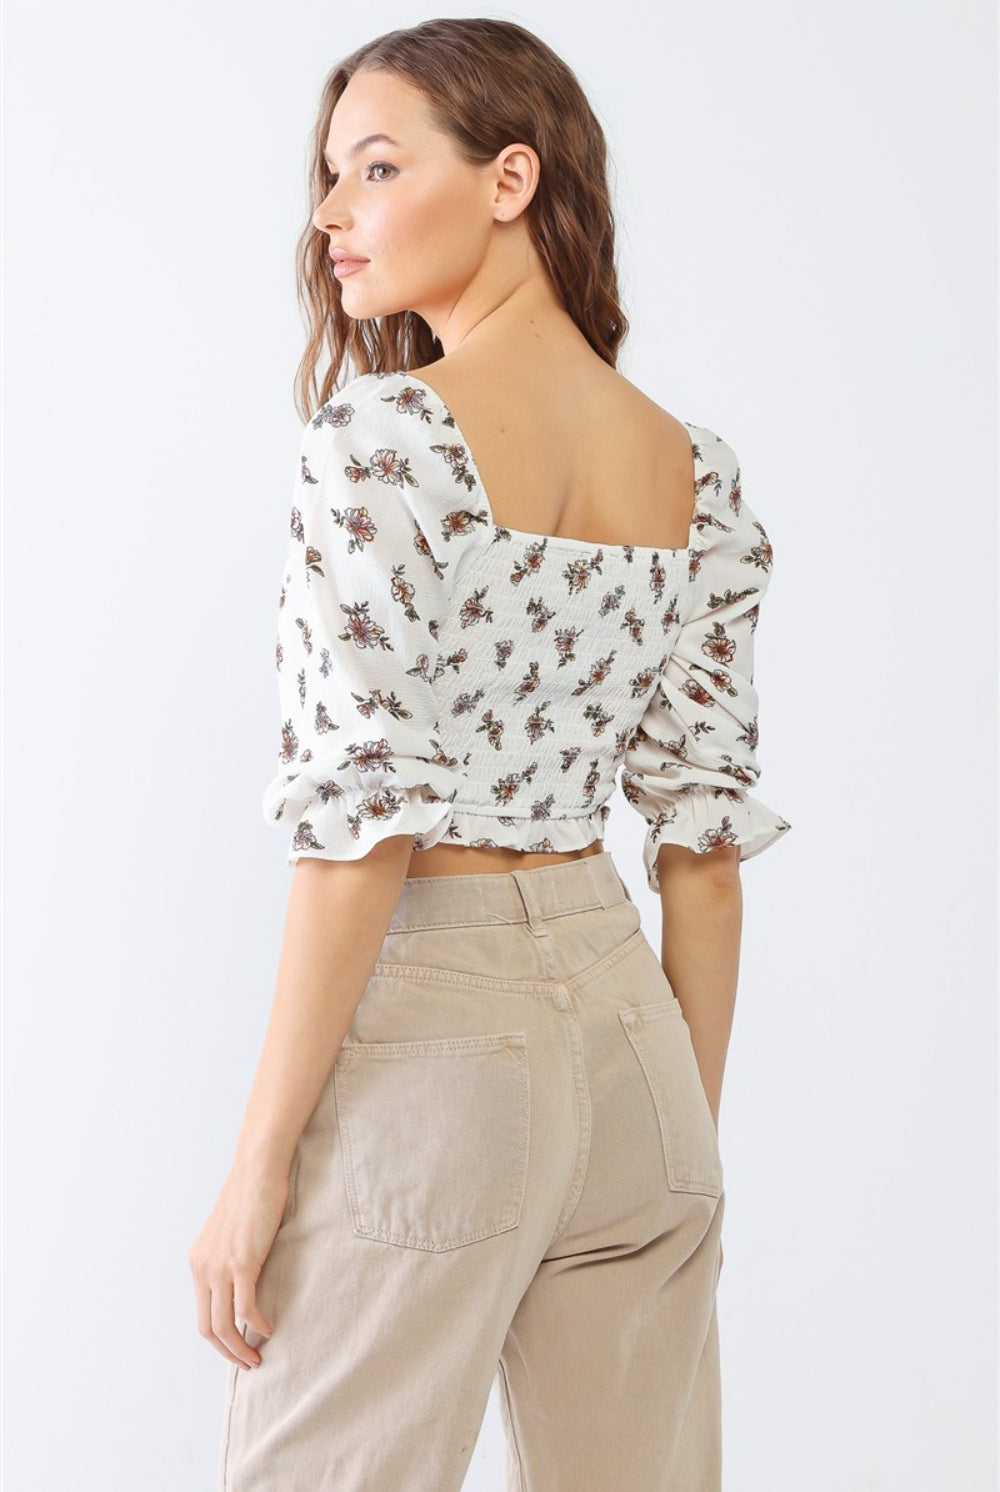 A woman in a white floral ruffled crop top, paired with casual beige pants for a fresh and trendy look.